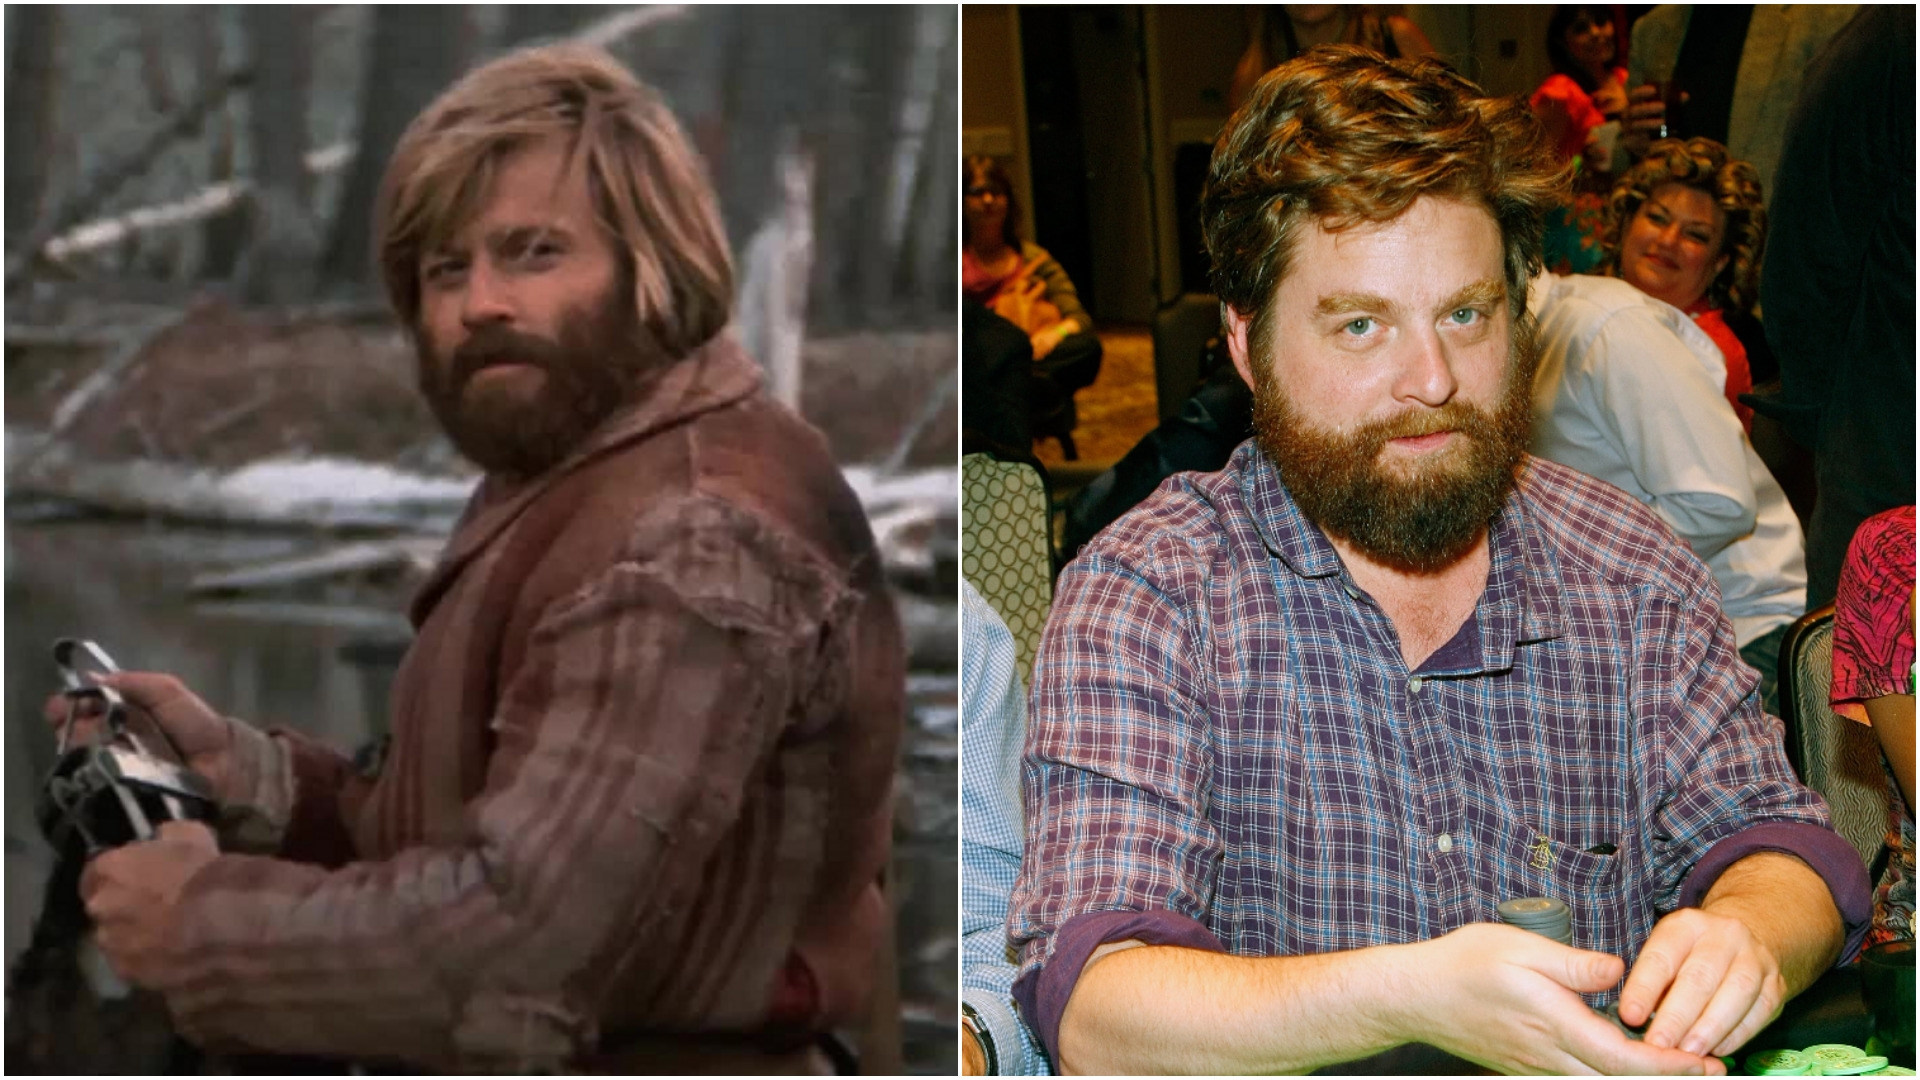 For the last time, this meme is of Robert Redford, not Zach Galifianakis